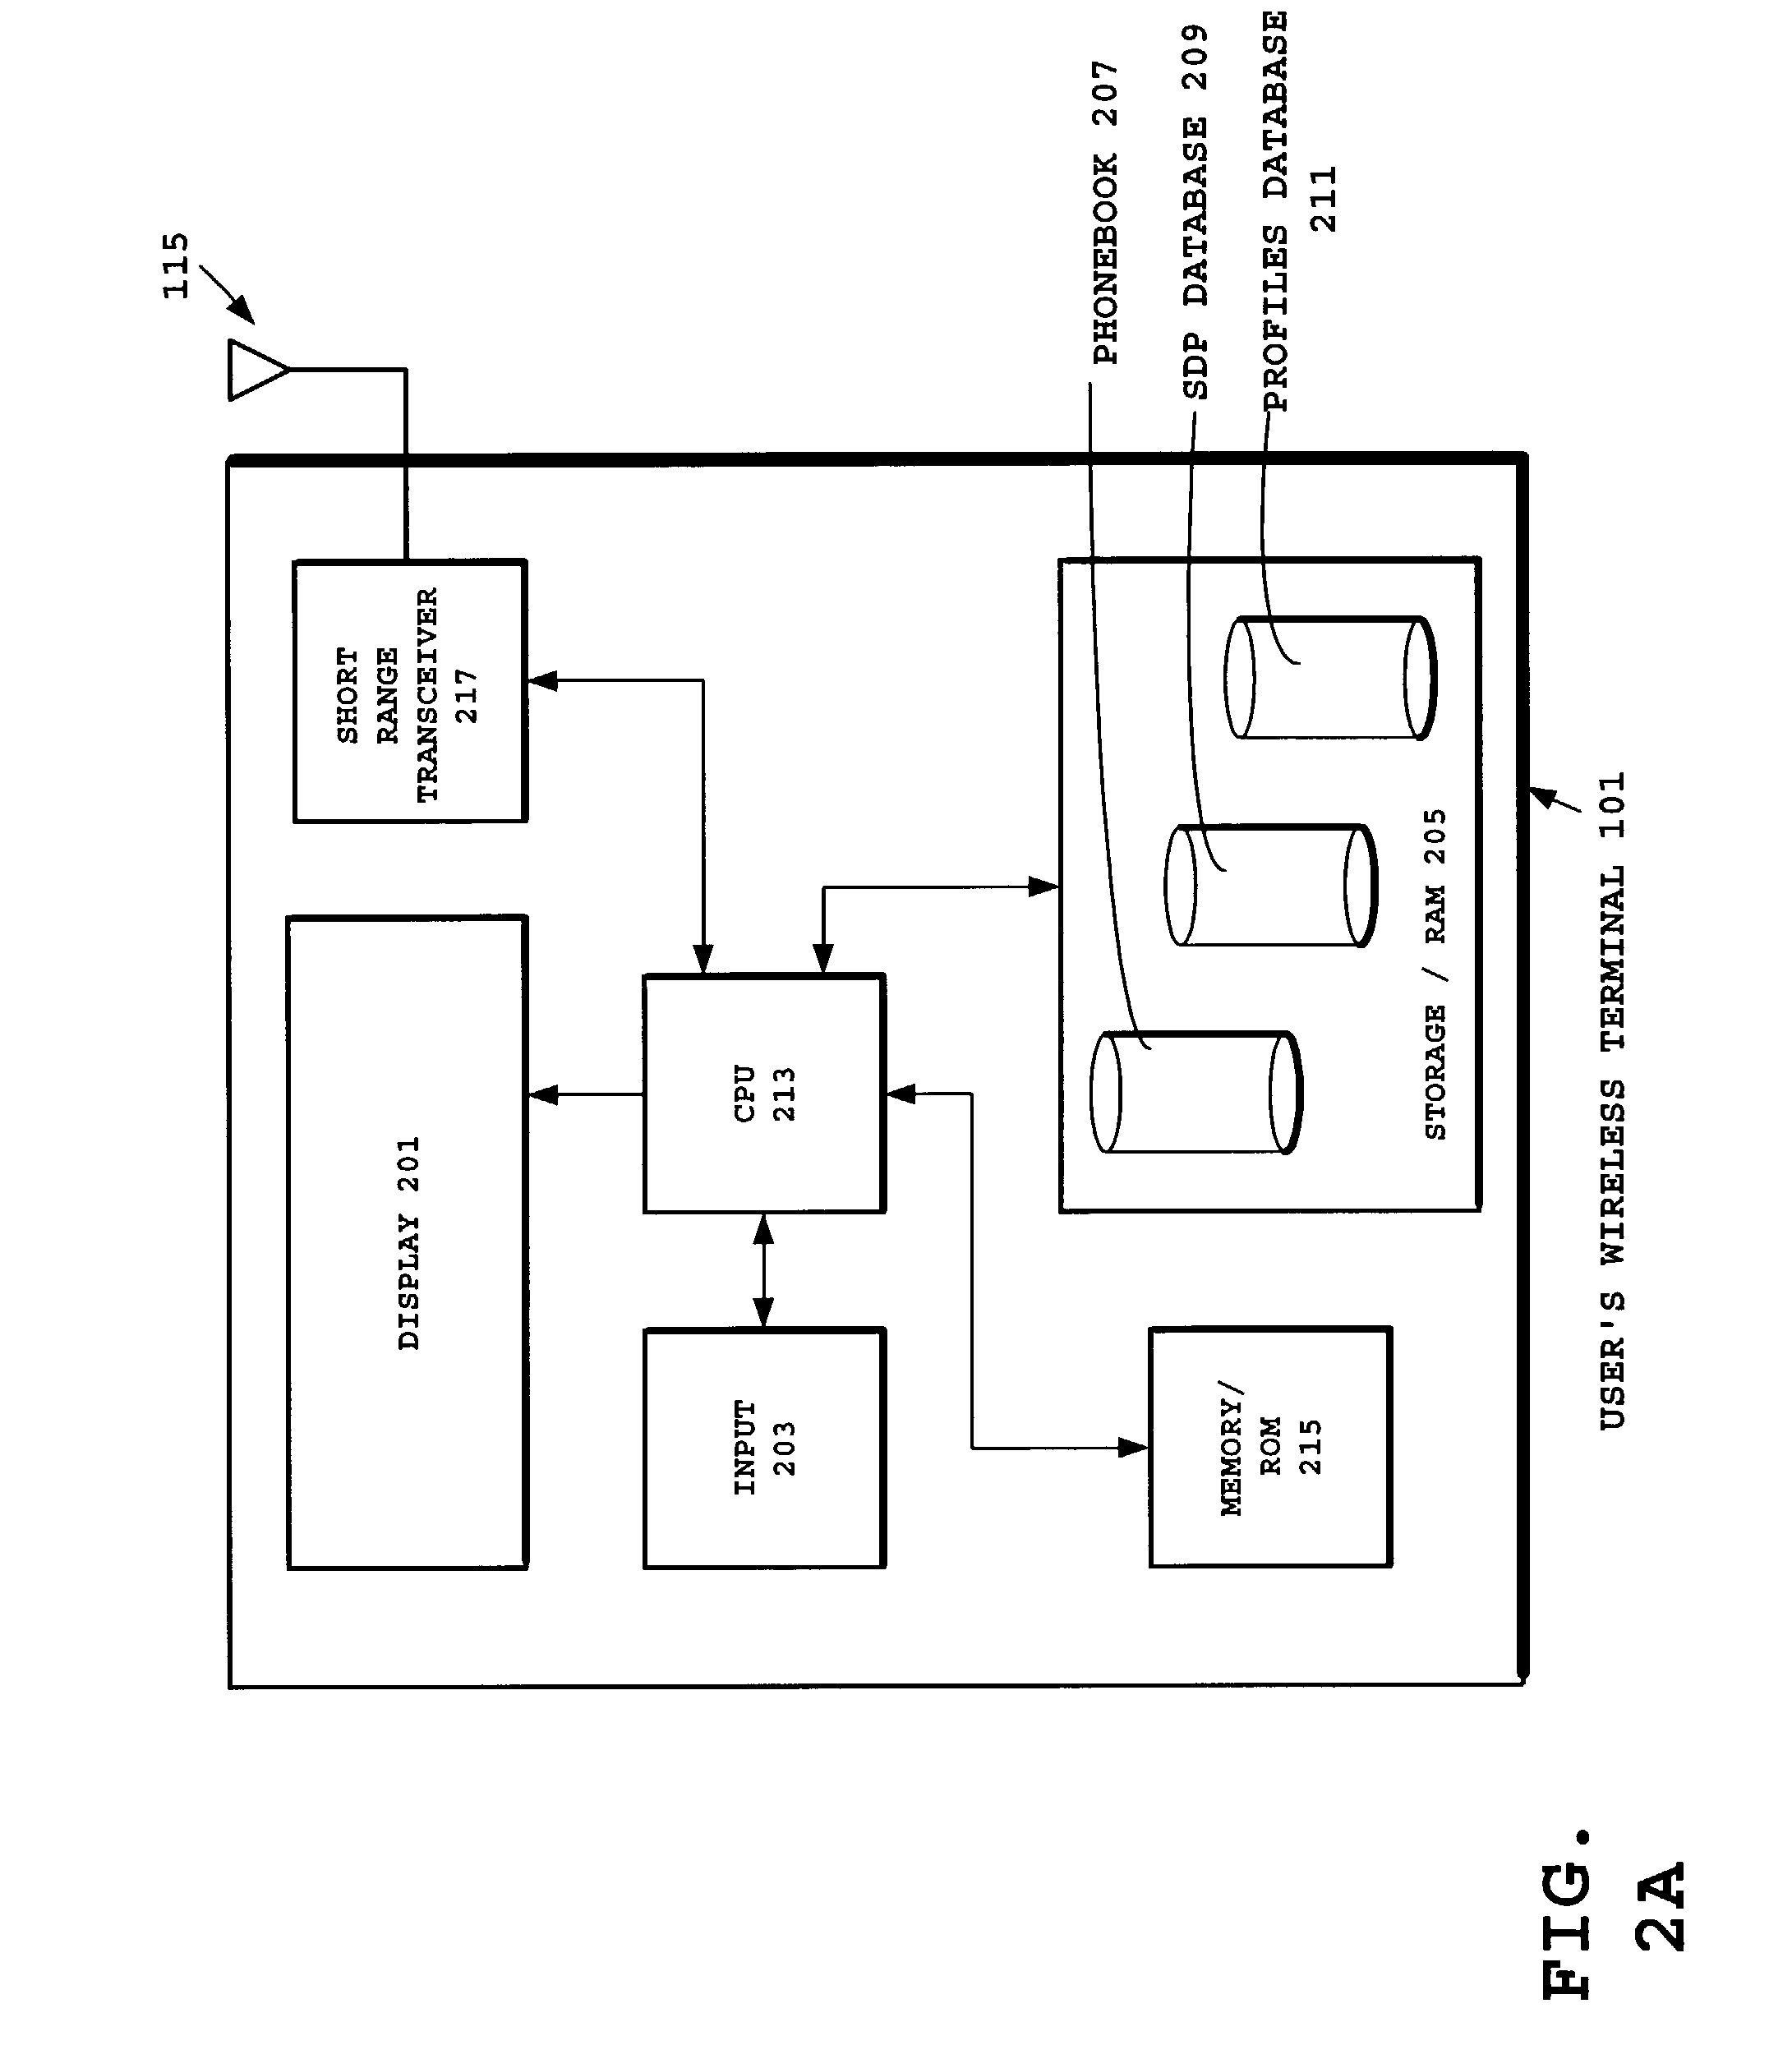 Automatic determination of access point content and services for short-range wireless terminals